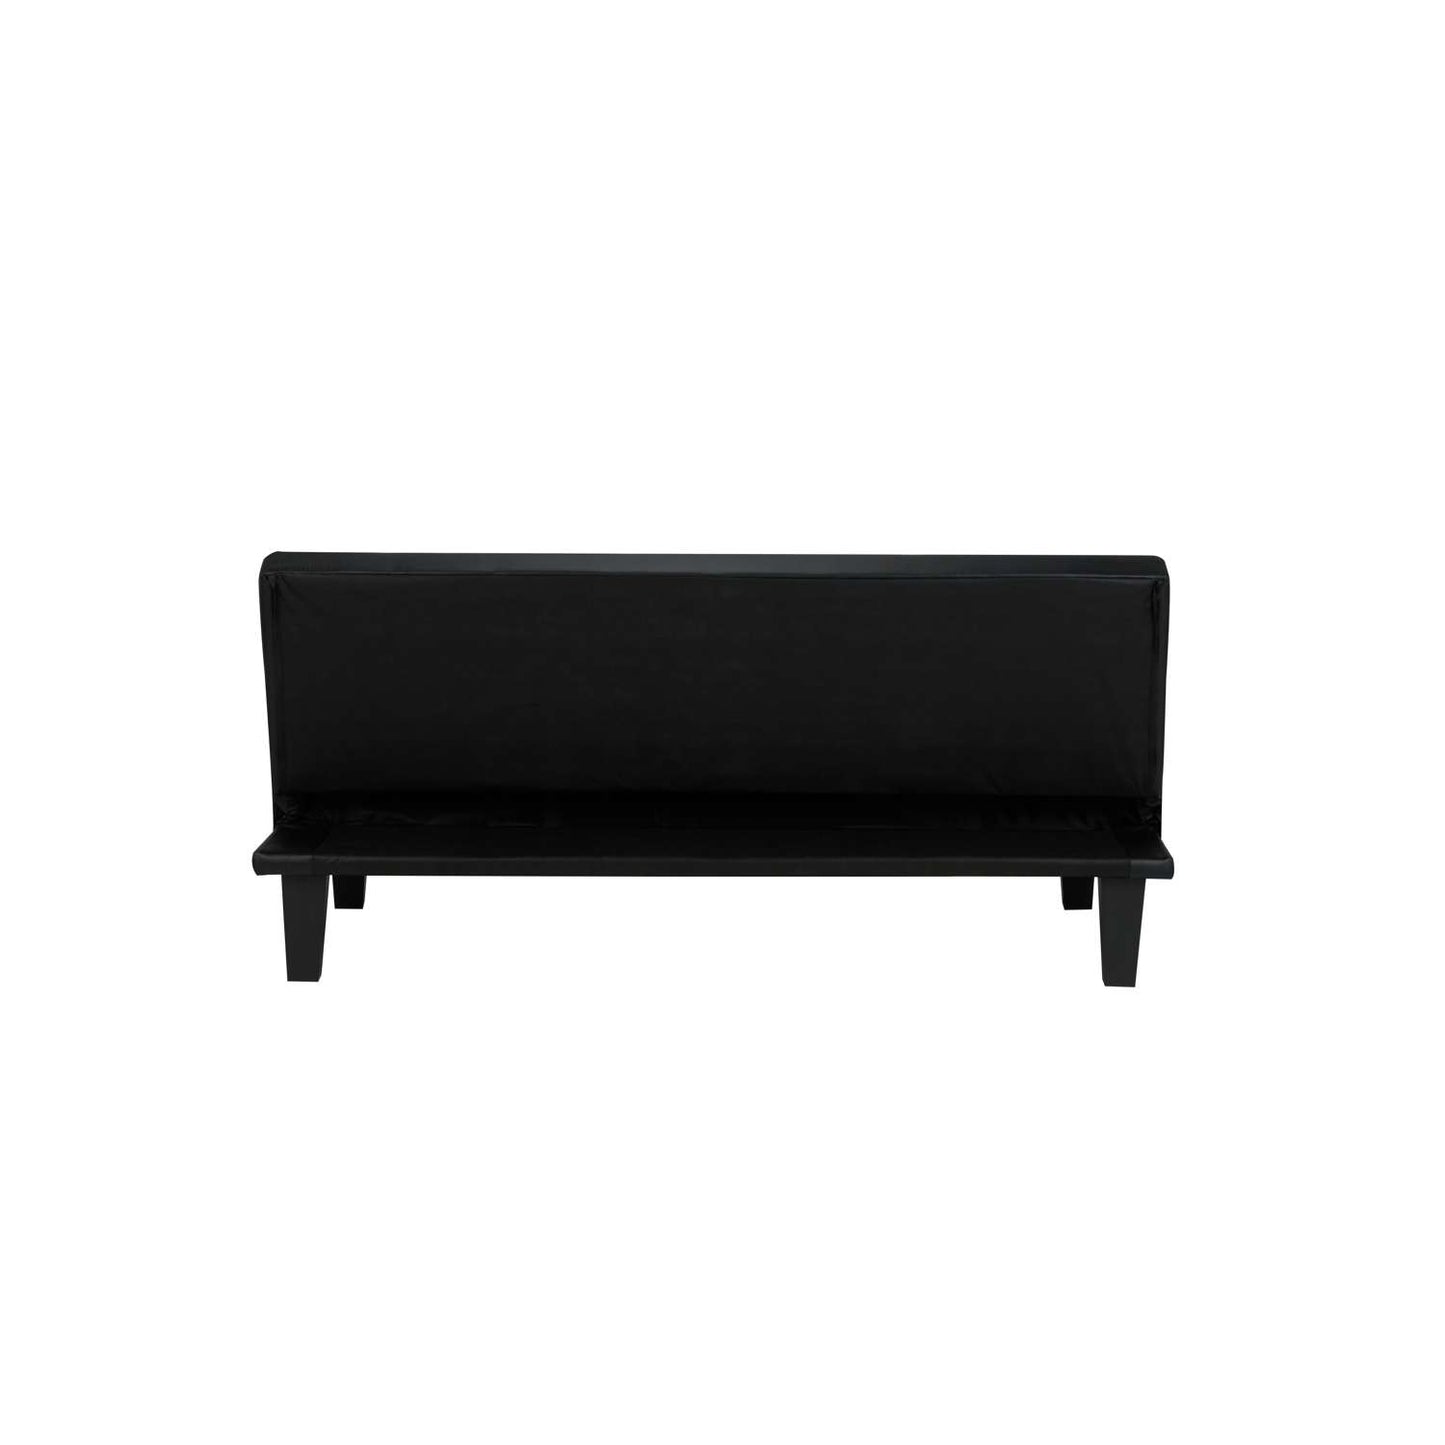 Franklin Black Faux Leather Sofa Bed